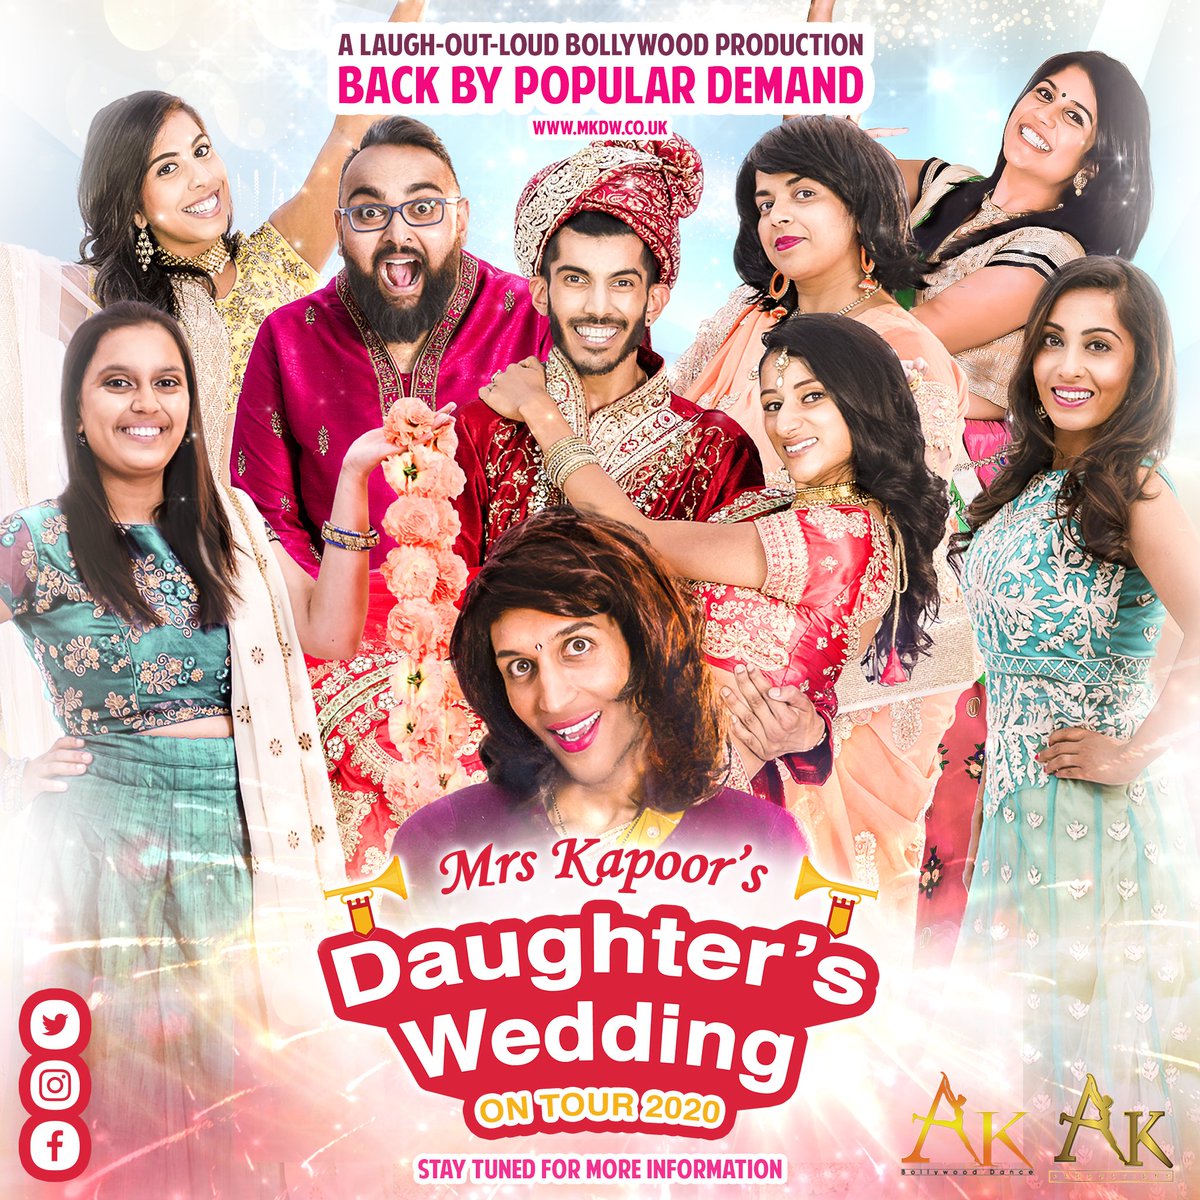 OH MY GOD! Have you heard?
Mrs Kapoor’s Daughter’s Wedding is back by popular demand!

Stay tuned for further information! Dates and Venues will be revealed soon!

#britishasiantheatre #uktheatreproduction #laughoutloud #comedysketches #bollywooddancing